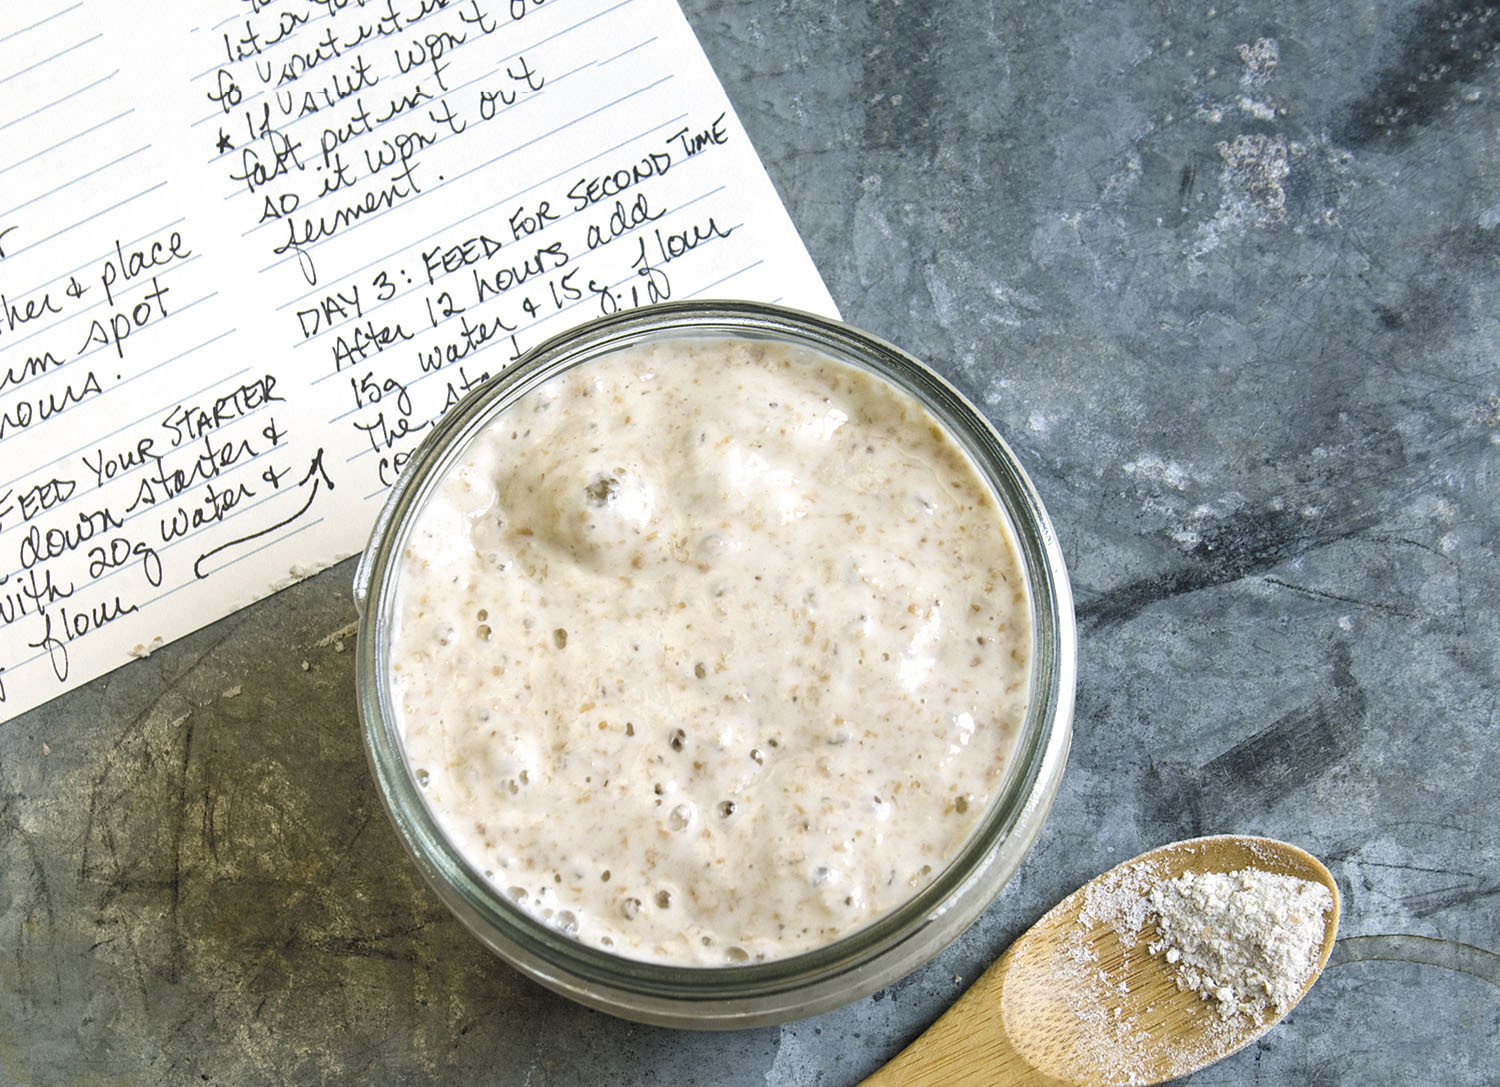 overhead view photo of a bowl of sourdough starter on a counter with a recipe written on an index card next to it